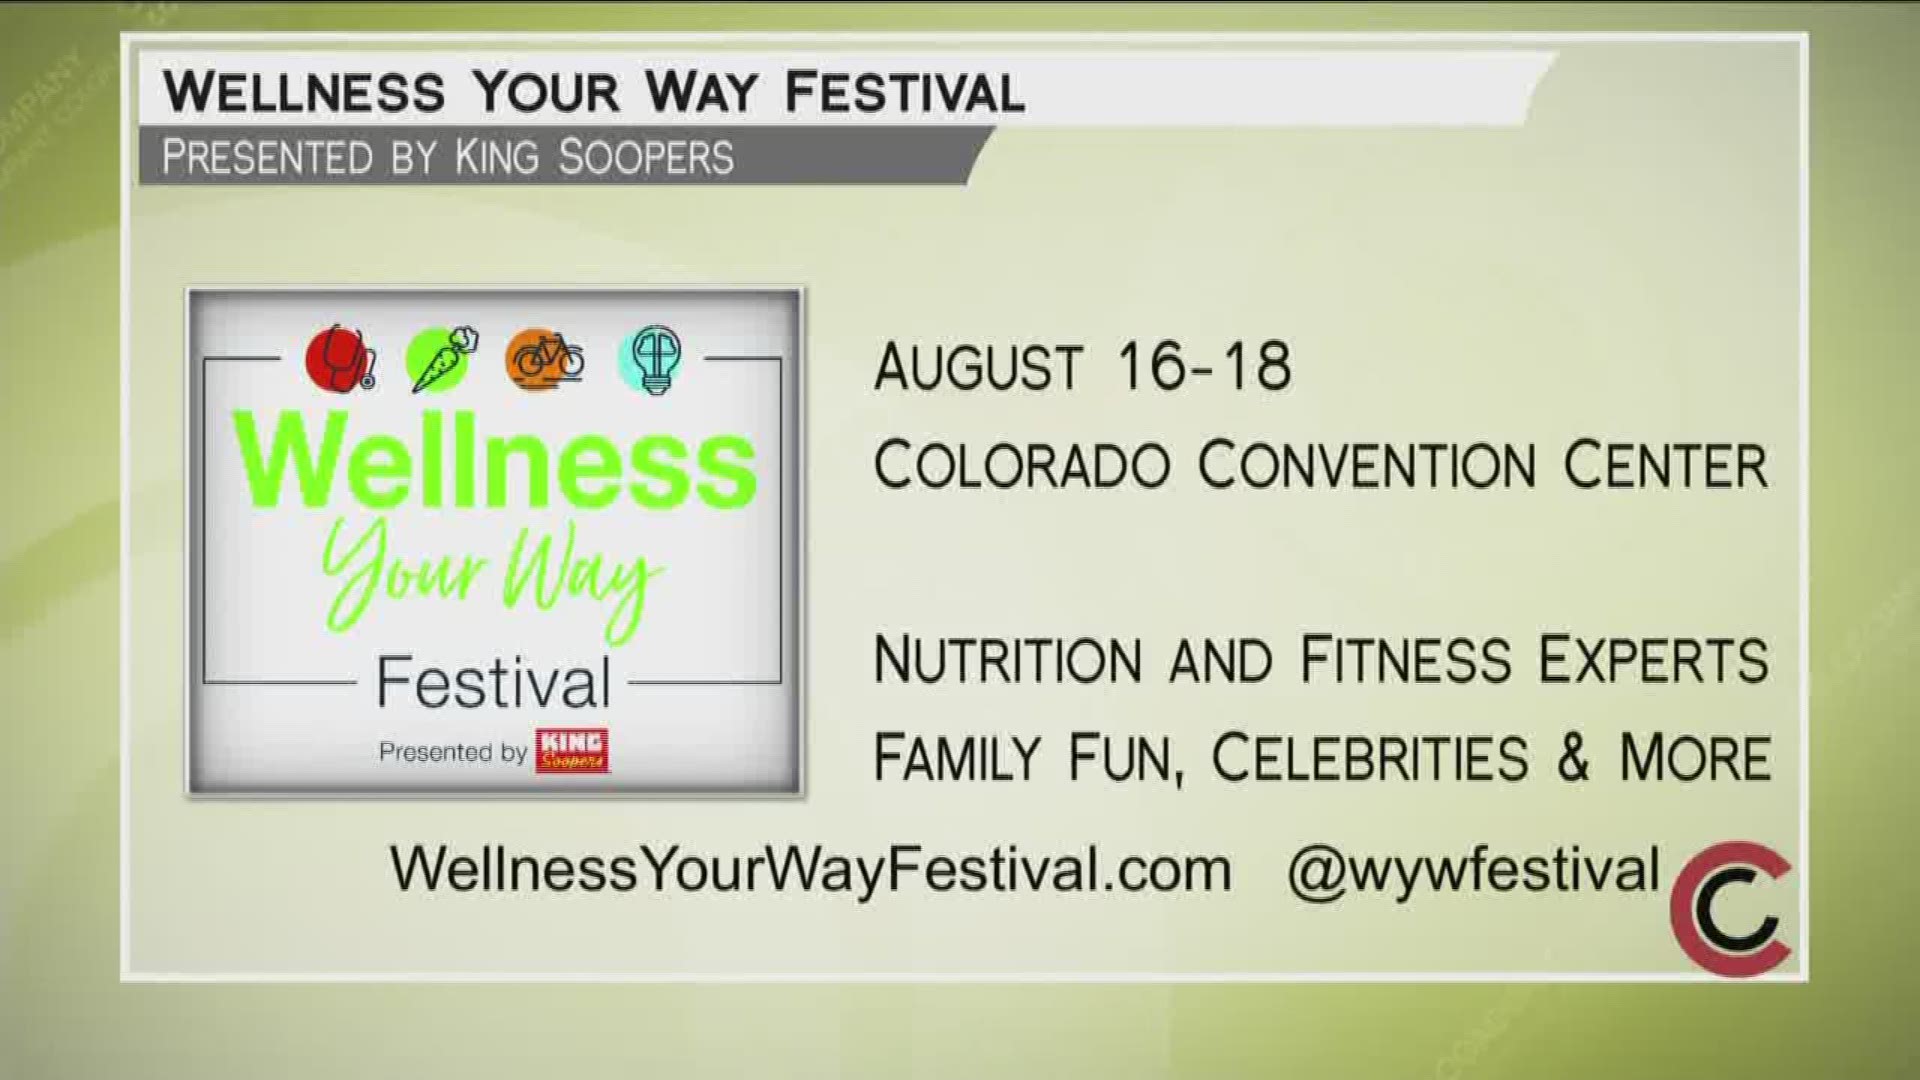 Meet top fitness and nutrition experts at the Wellness Your Way Festival, presented by King Soopers. It’s happening this weekend at the Colorado Convention Center. Tickets start at just $10. Kids 12 and under get in free. Learn more at www.WellnessYourWayFestival.com. 
 THIS INTERVIEW HAS COMMERCIAL CONTENT. PRODUCTS AND SERVICES FEATURED APPEAR AS PAID ADVERTISING.